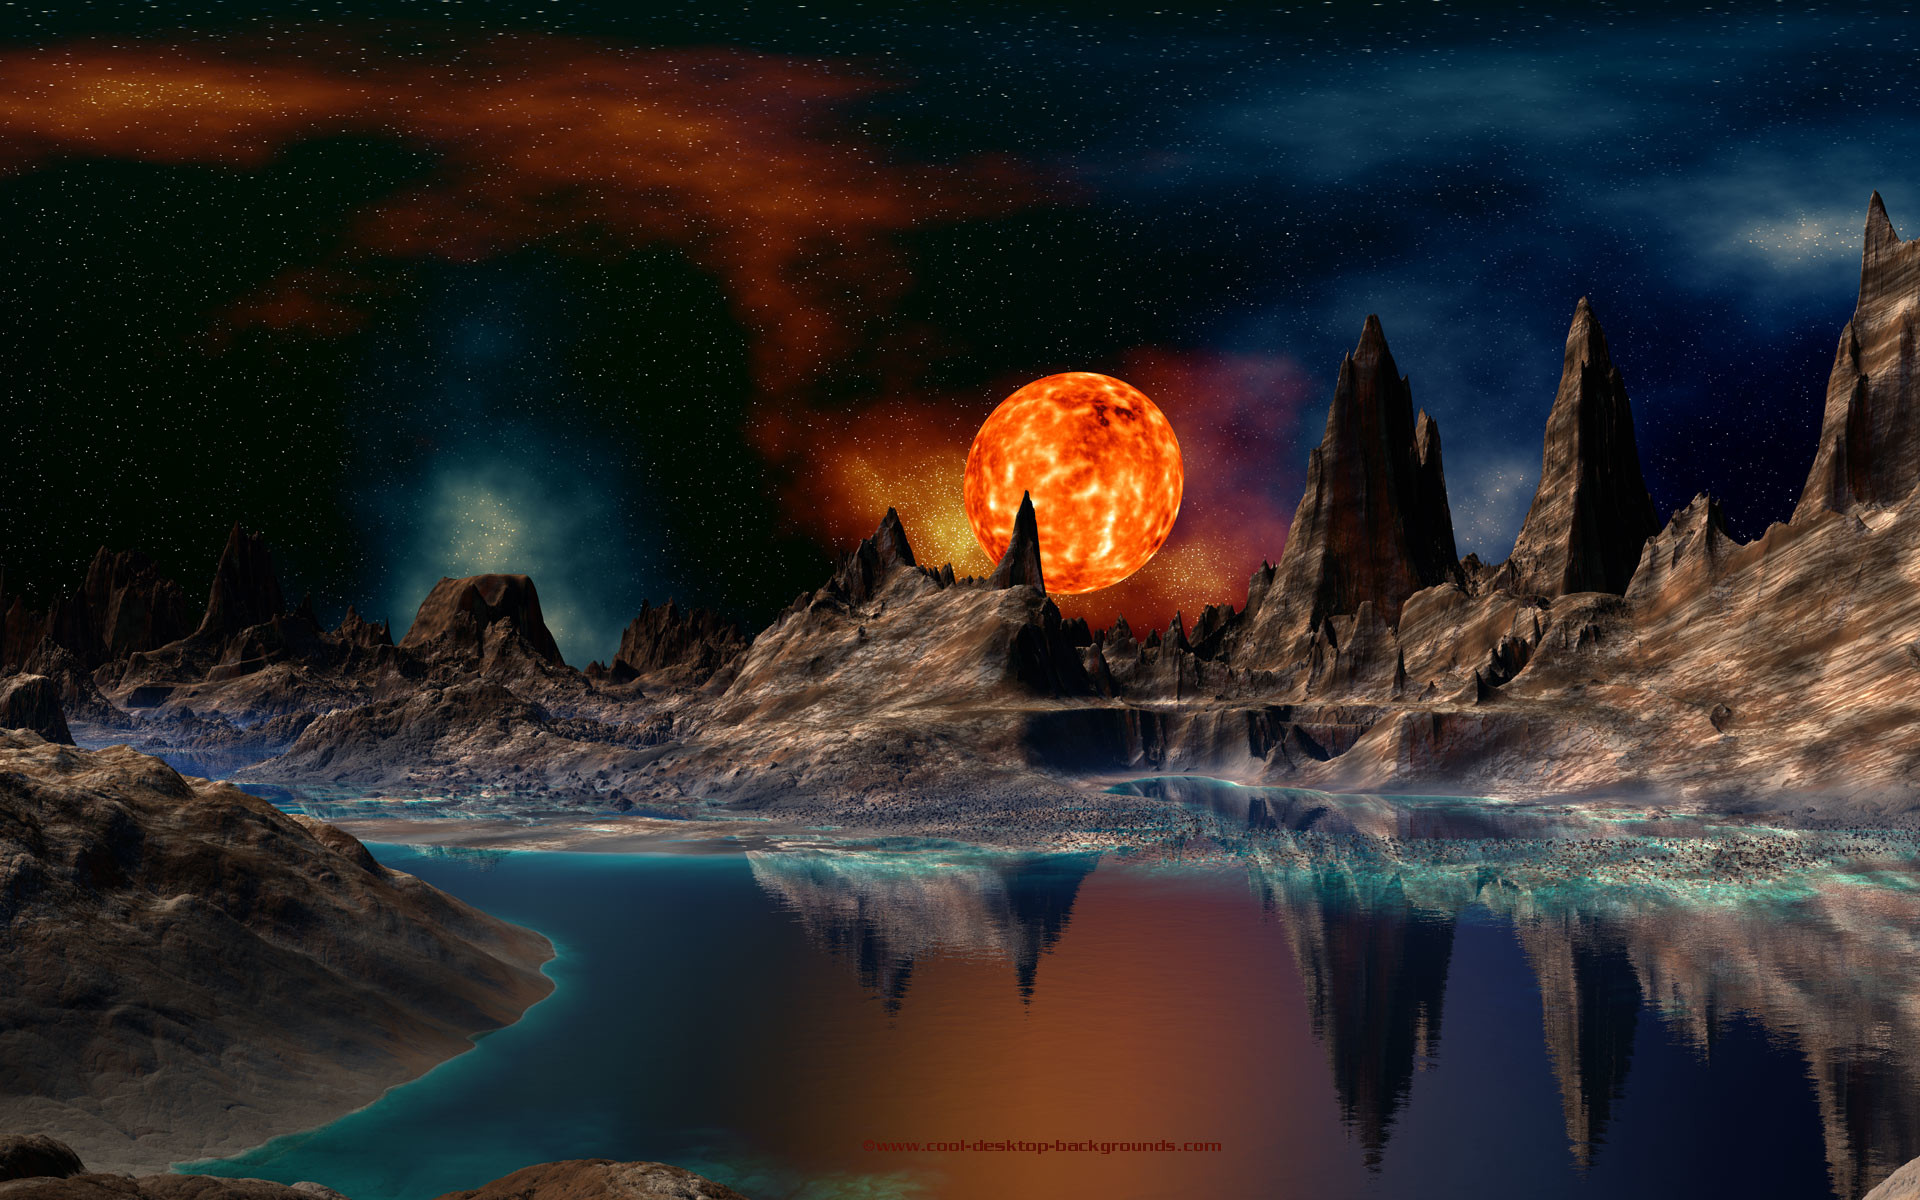 Space background of a red giant sun setting over a rocky alien planet. Scifi space background for use as your computers desktop wallpaper